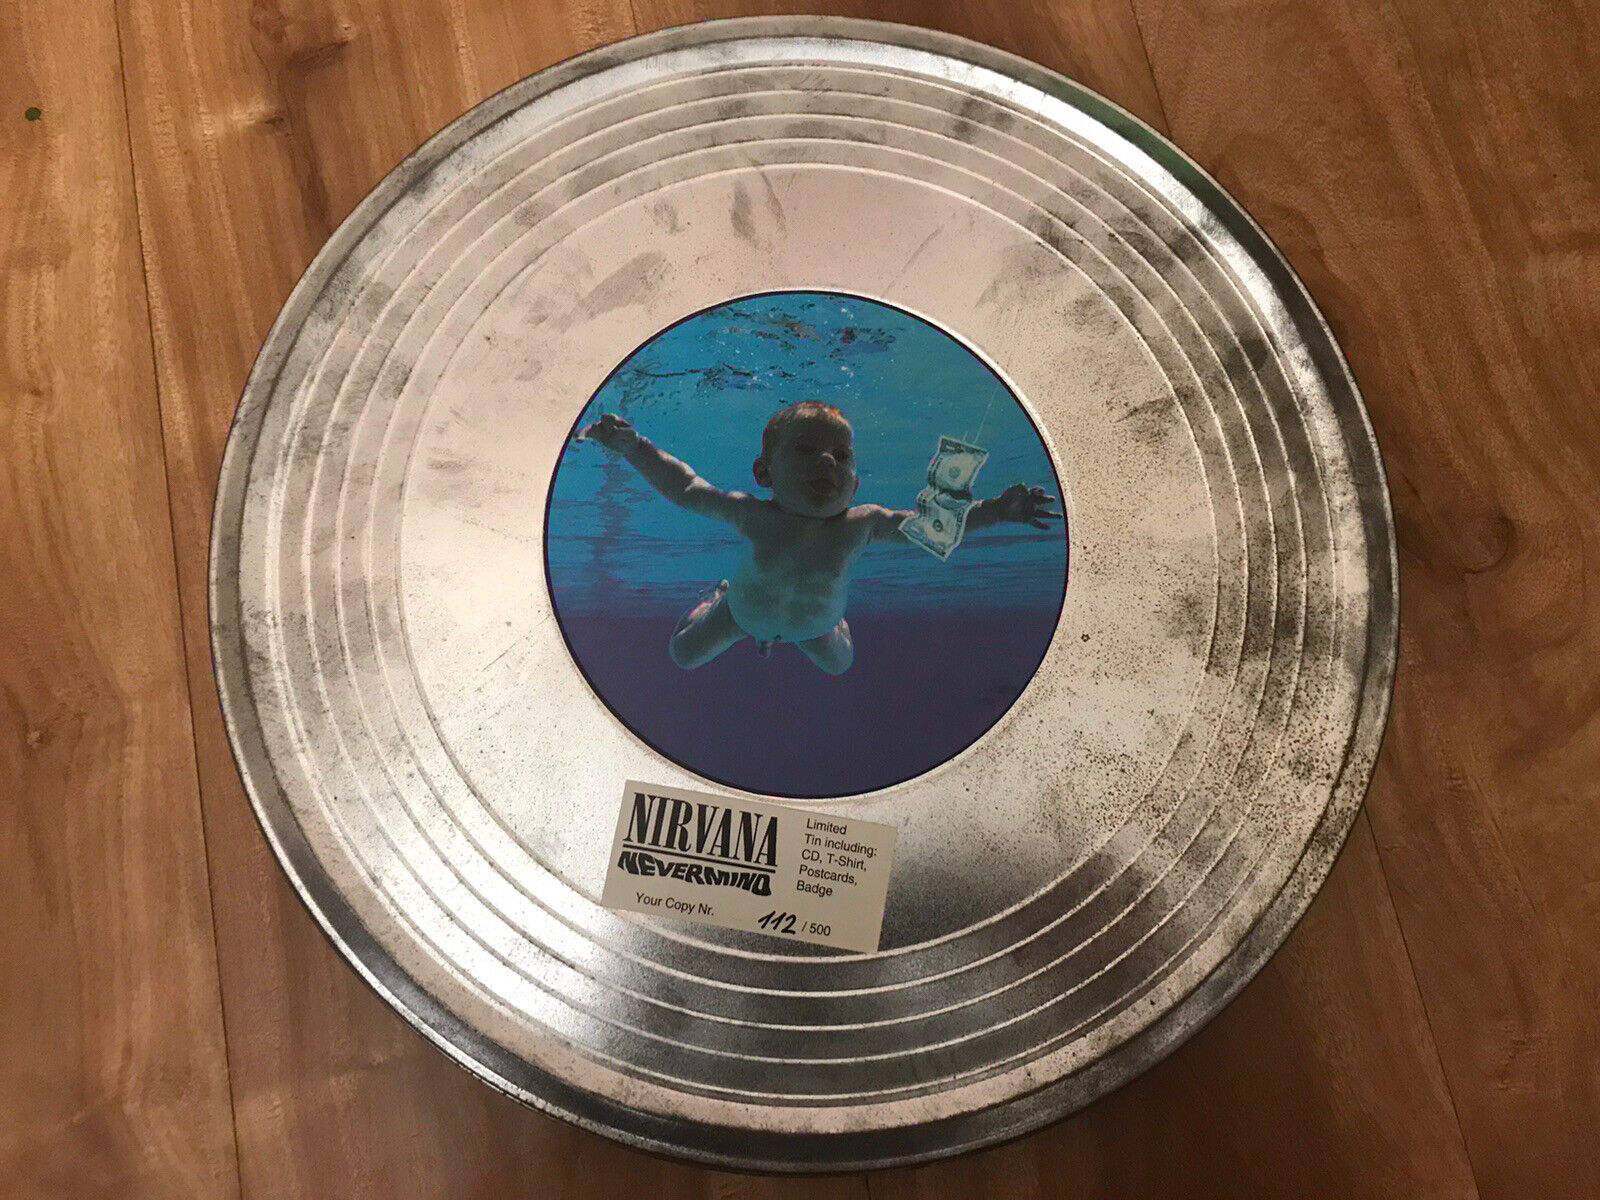 Vintage Nirvana Film Can With Nevermind CD, Button and Postcard